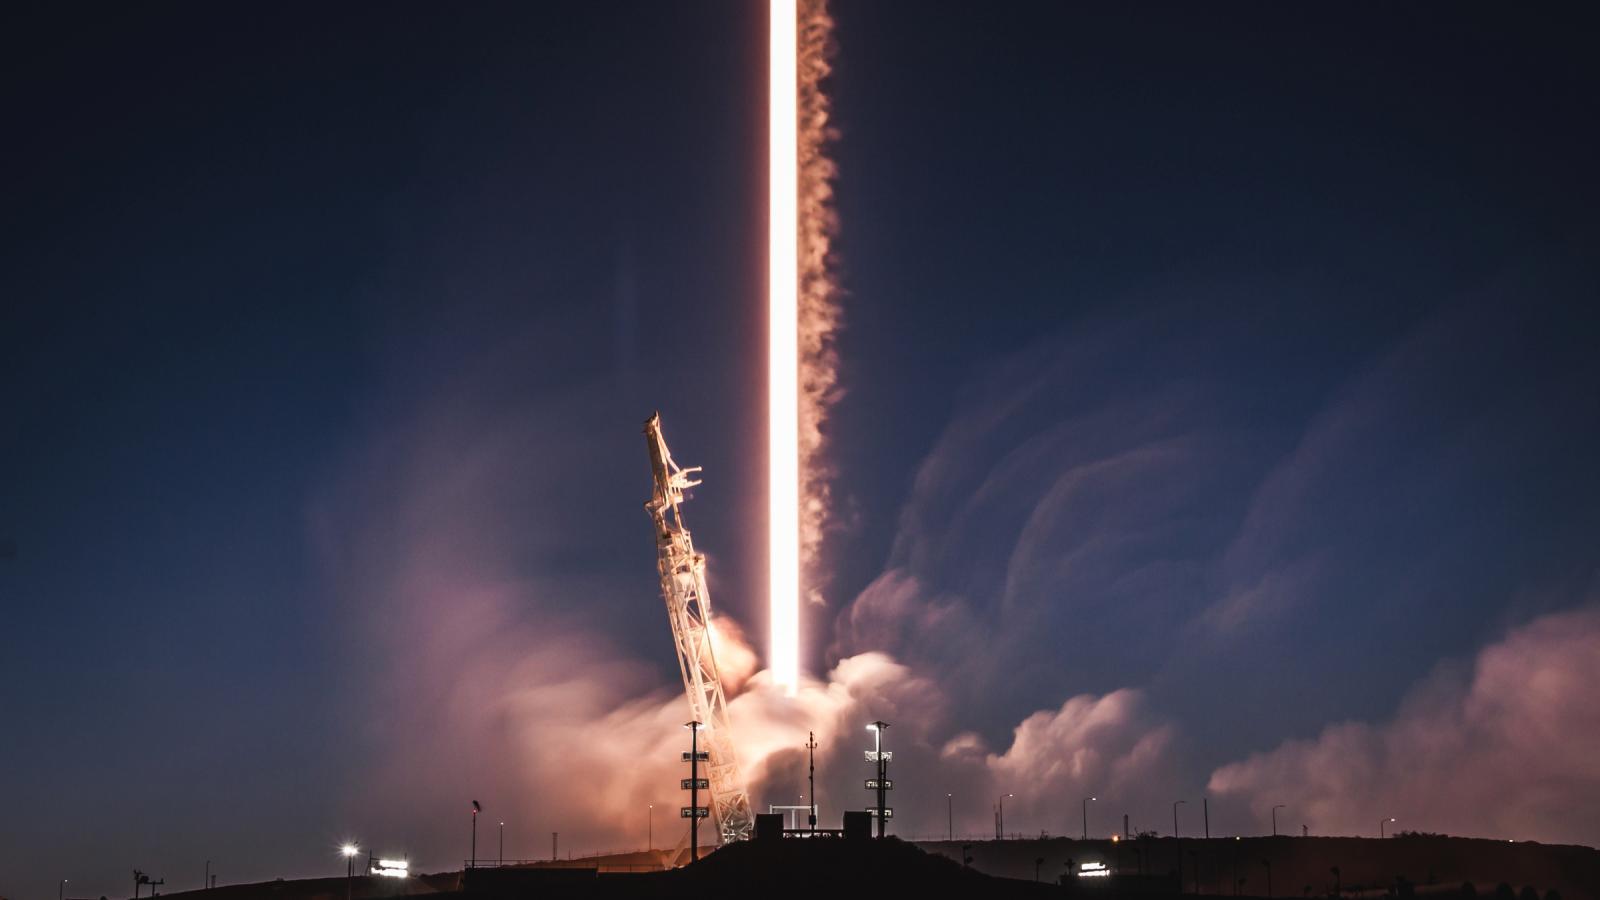 Elon Musk's SpaceX has launched its 50th Falcon 9 rocket to orbit